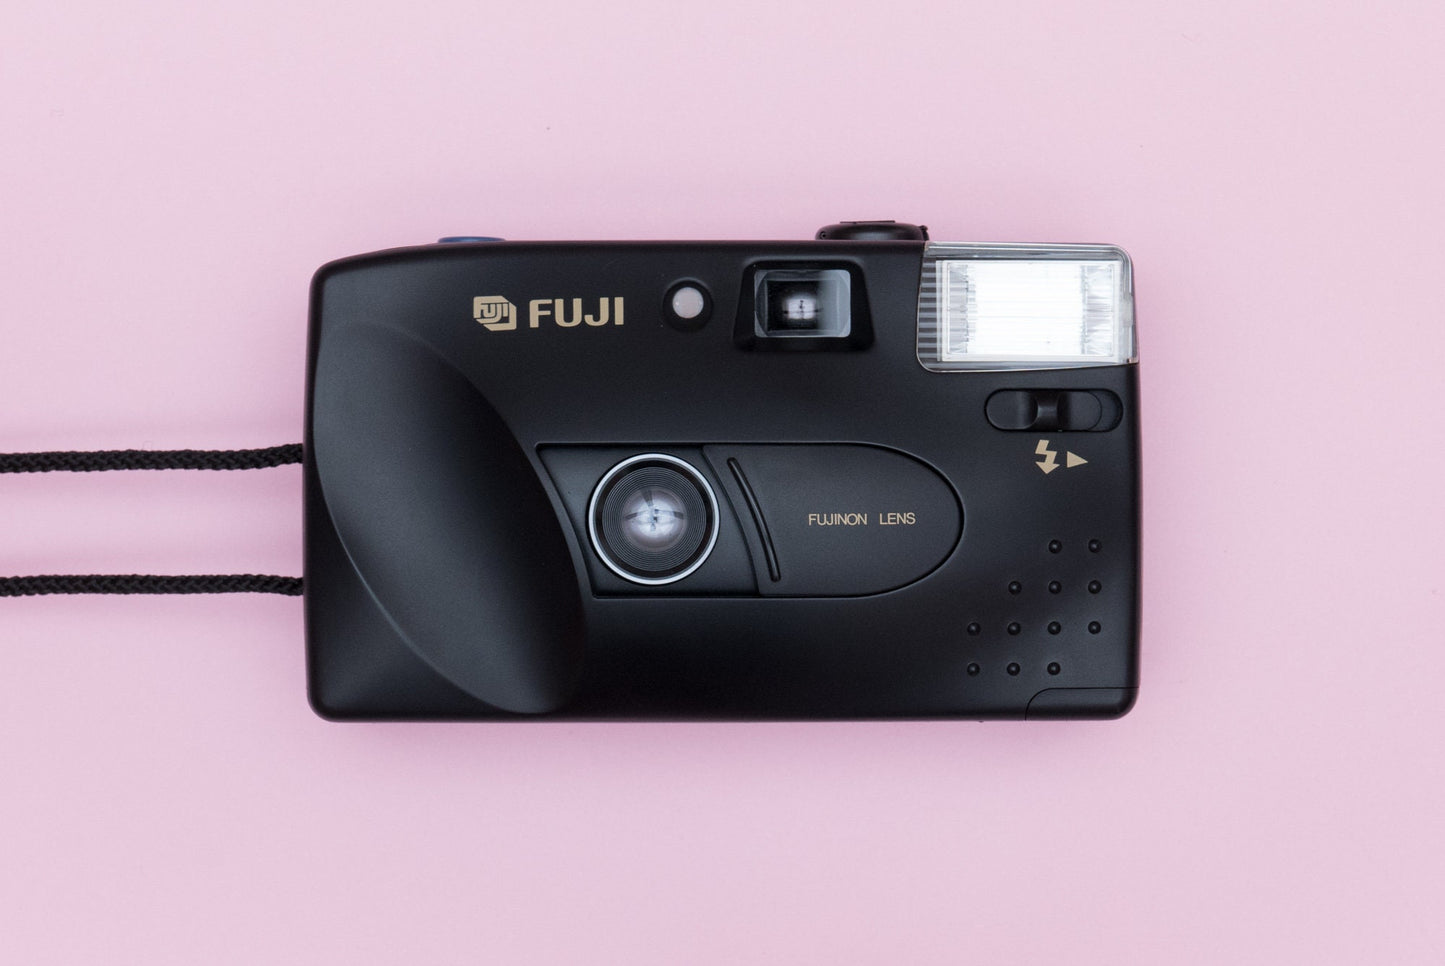 Fuji DL-8 Compact 35mm Point and Shoot Film Camera